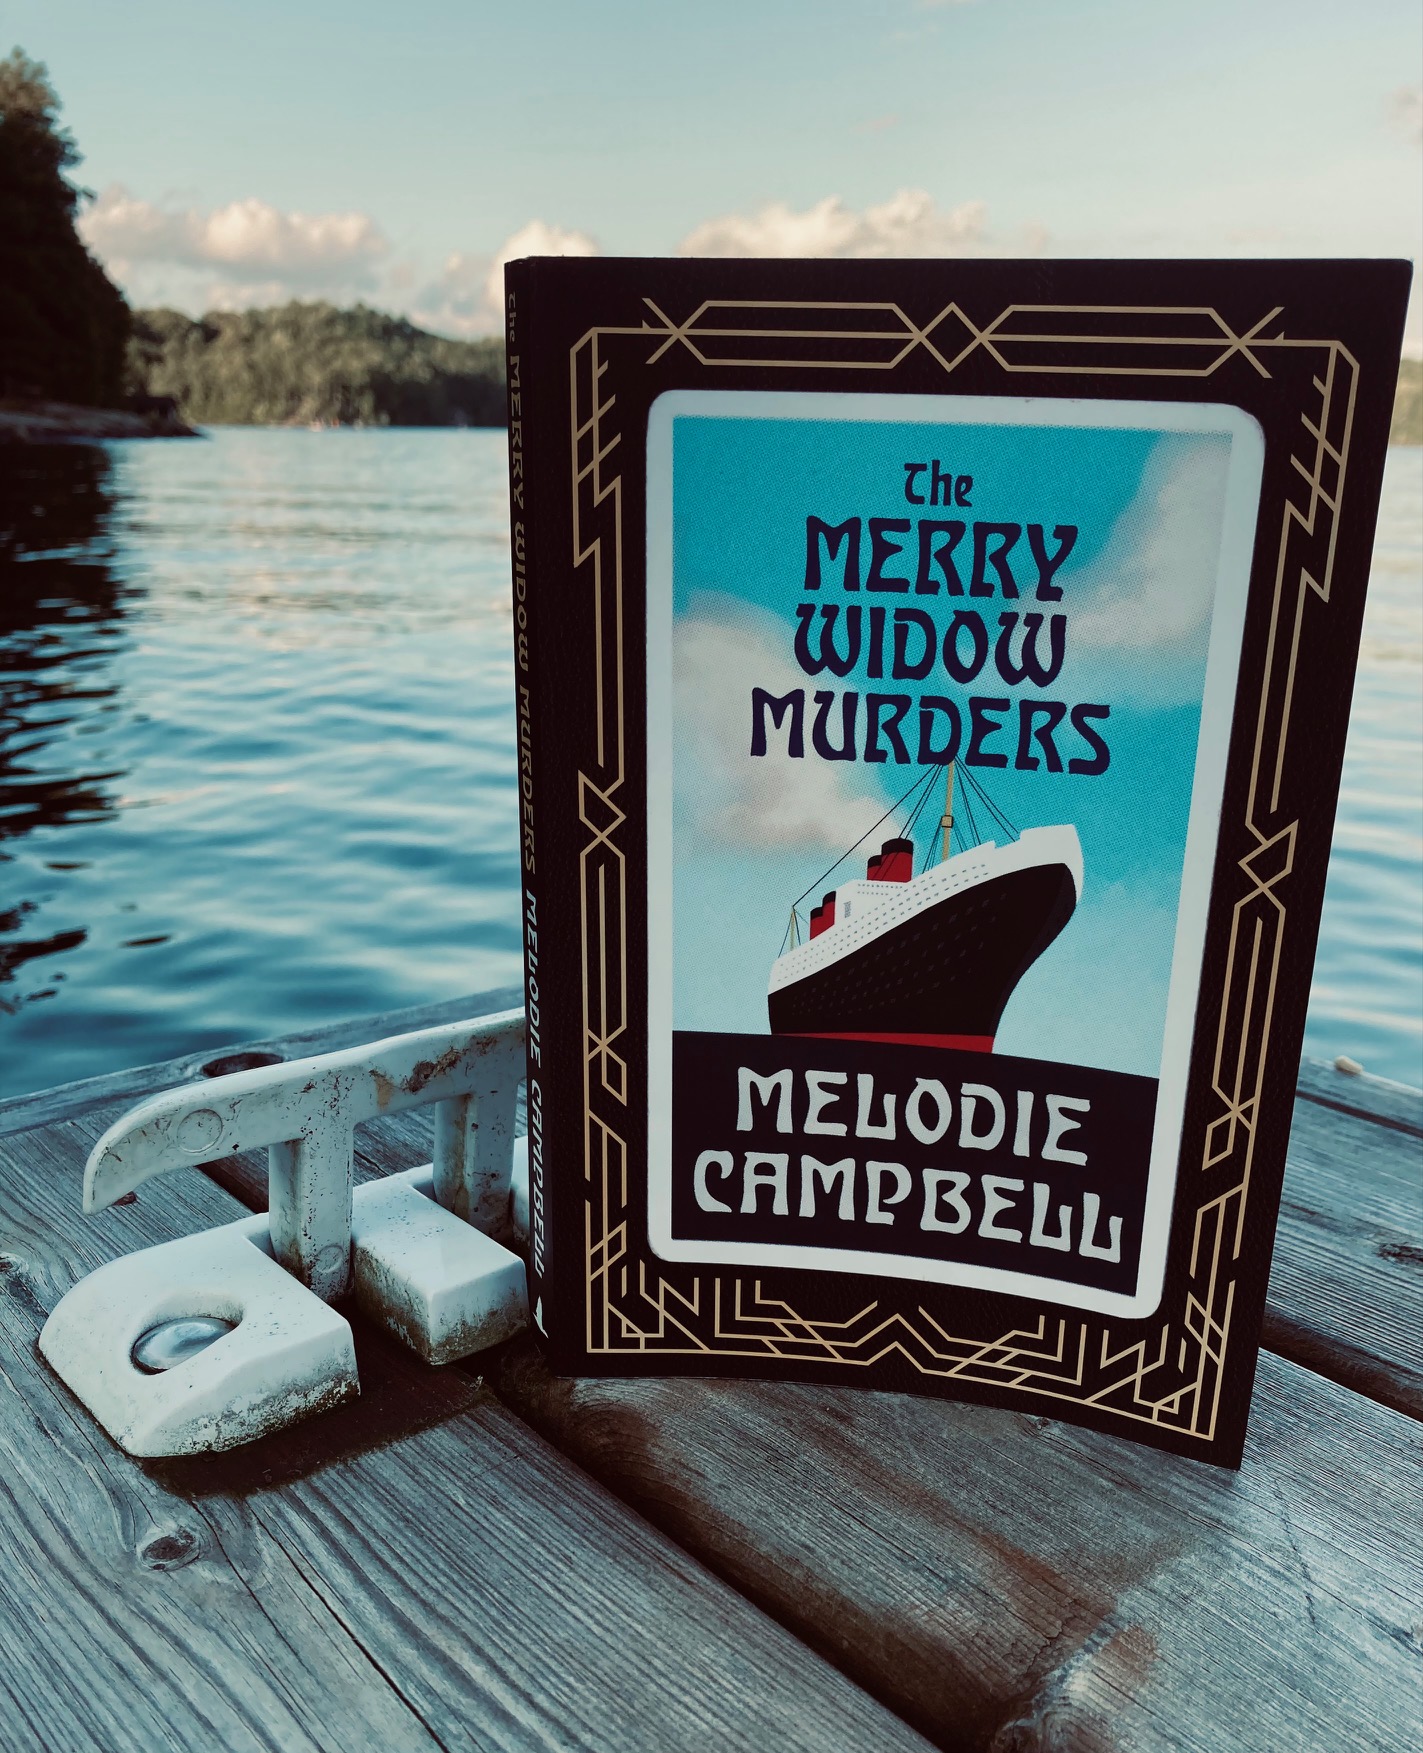 The Merry Widow Murders by Melodie Campbell book pictured on a dock in front of a lake